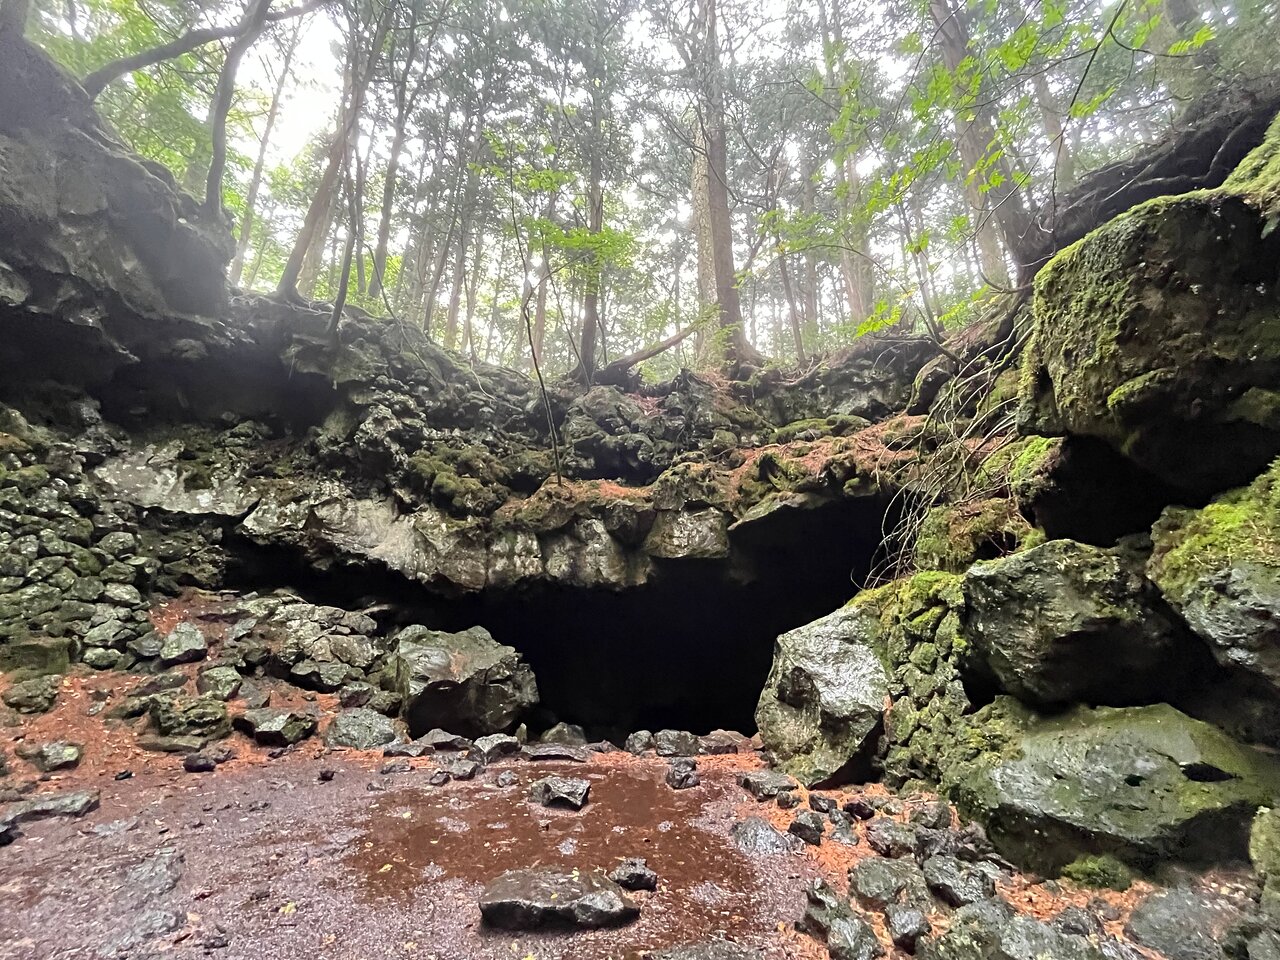 Explore Mt. Fuji Ice Cave in Aokigahara Forest - Discover the Mysteries of the Mt. Fuji Ice Cave